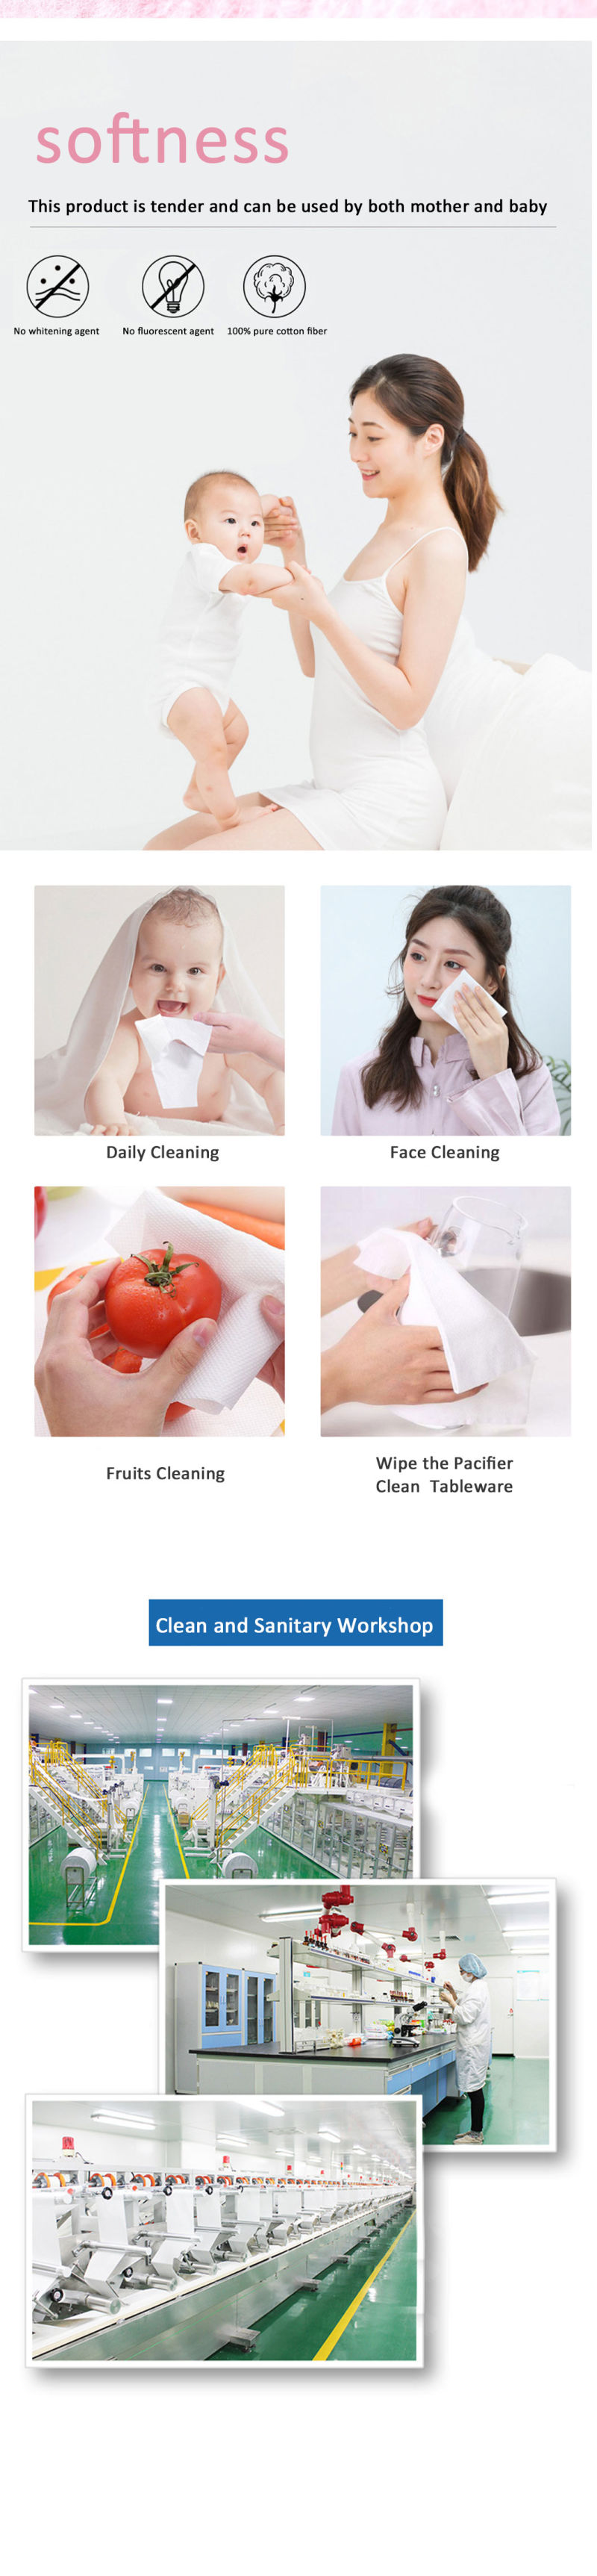 Wholesale Beaty Natural 100% Pure Cotton Removable Baby Soft Dry and Wet Face Disposable Makeup Cleansing Towel Tissue